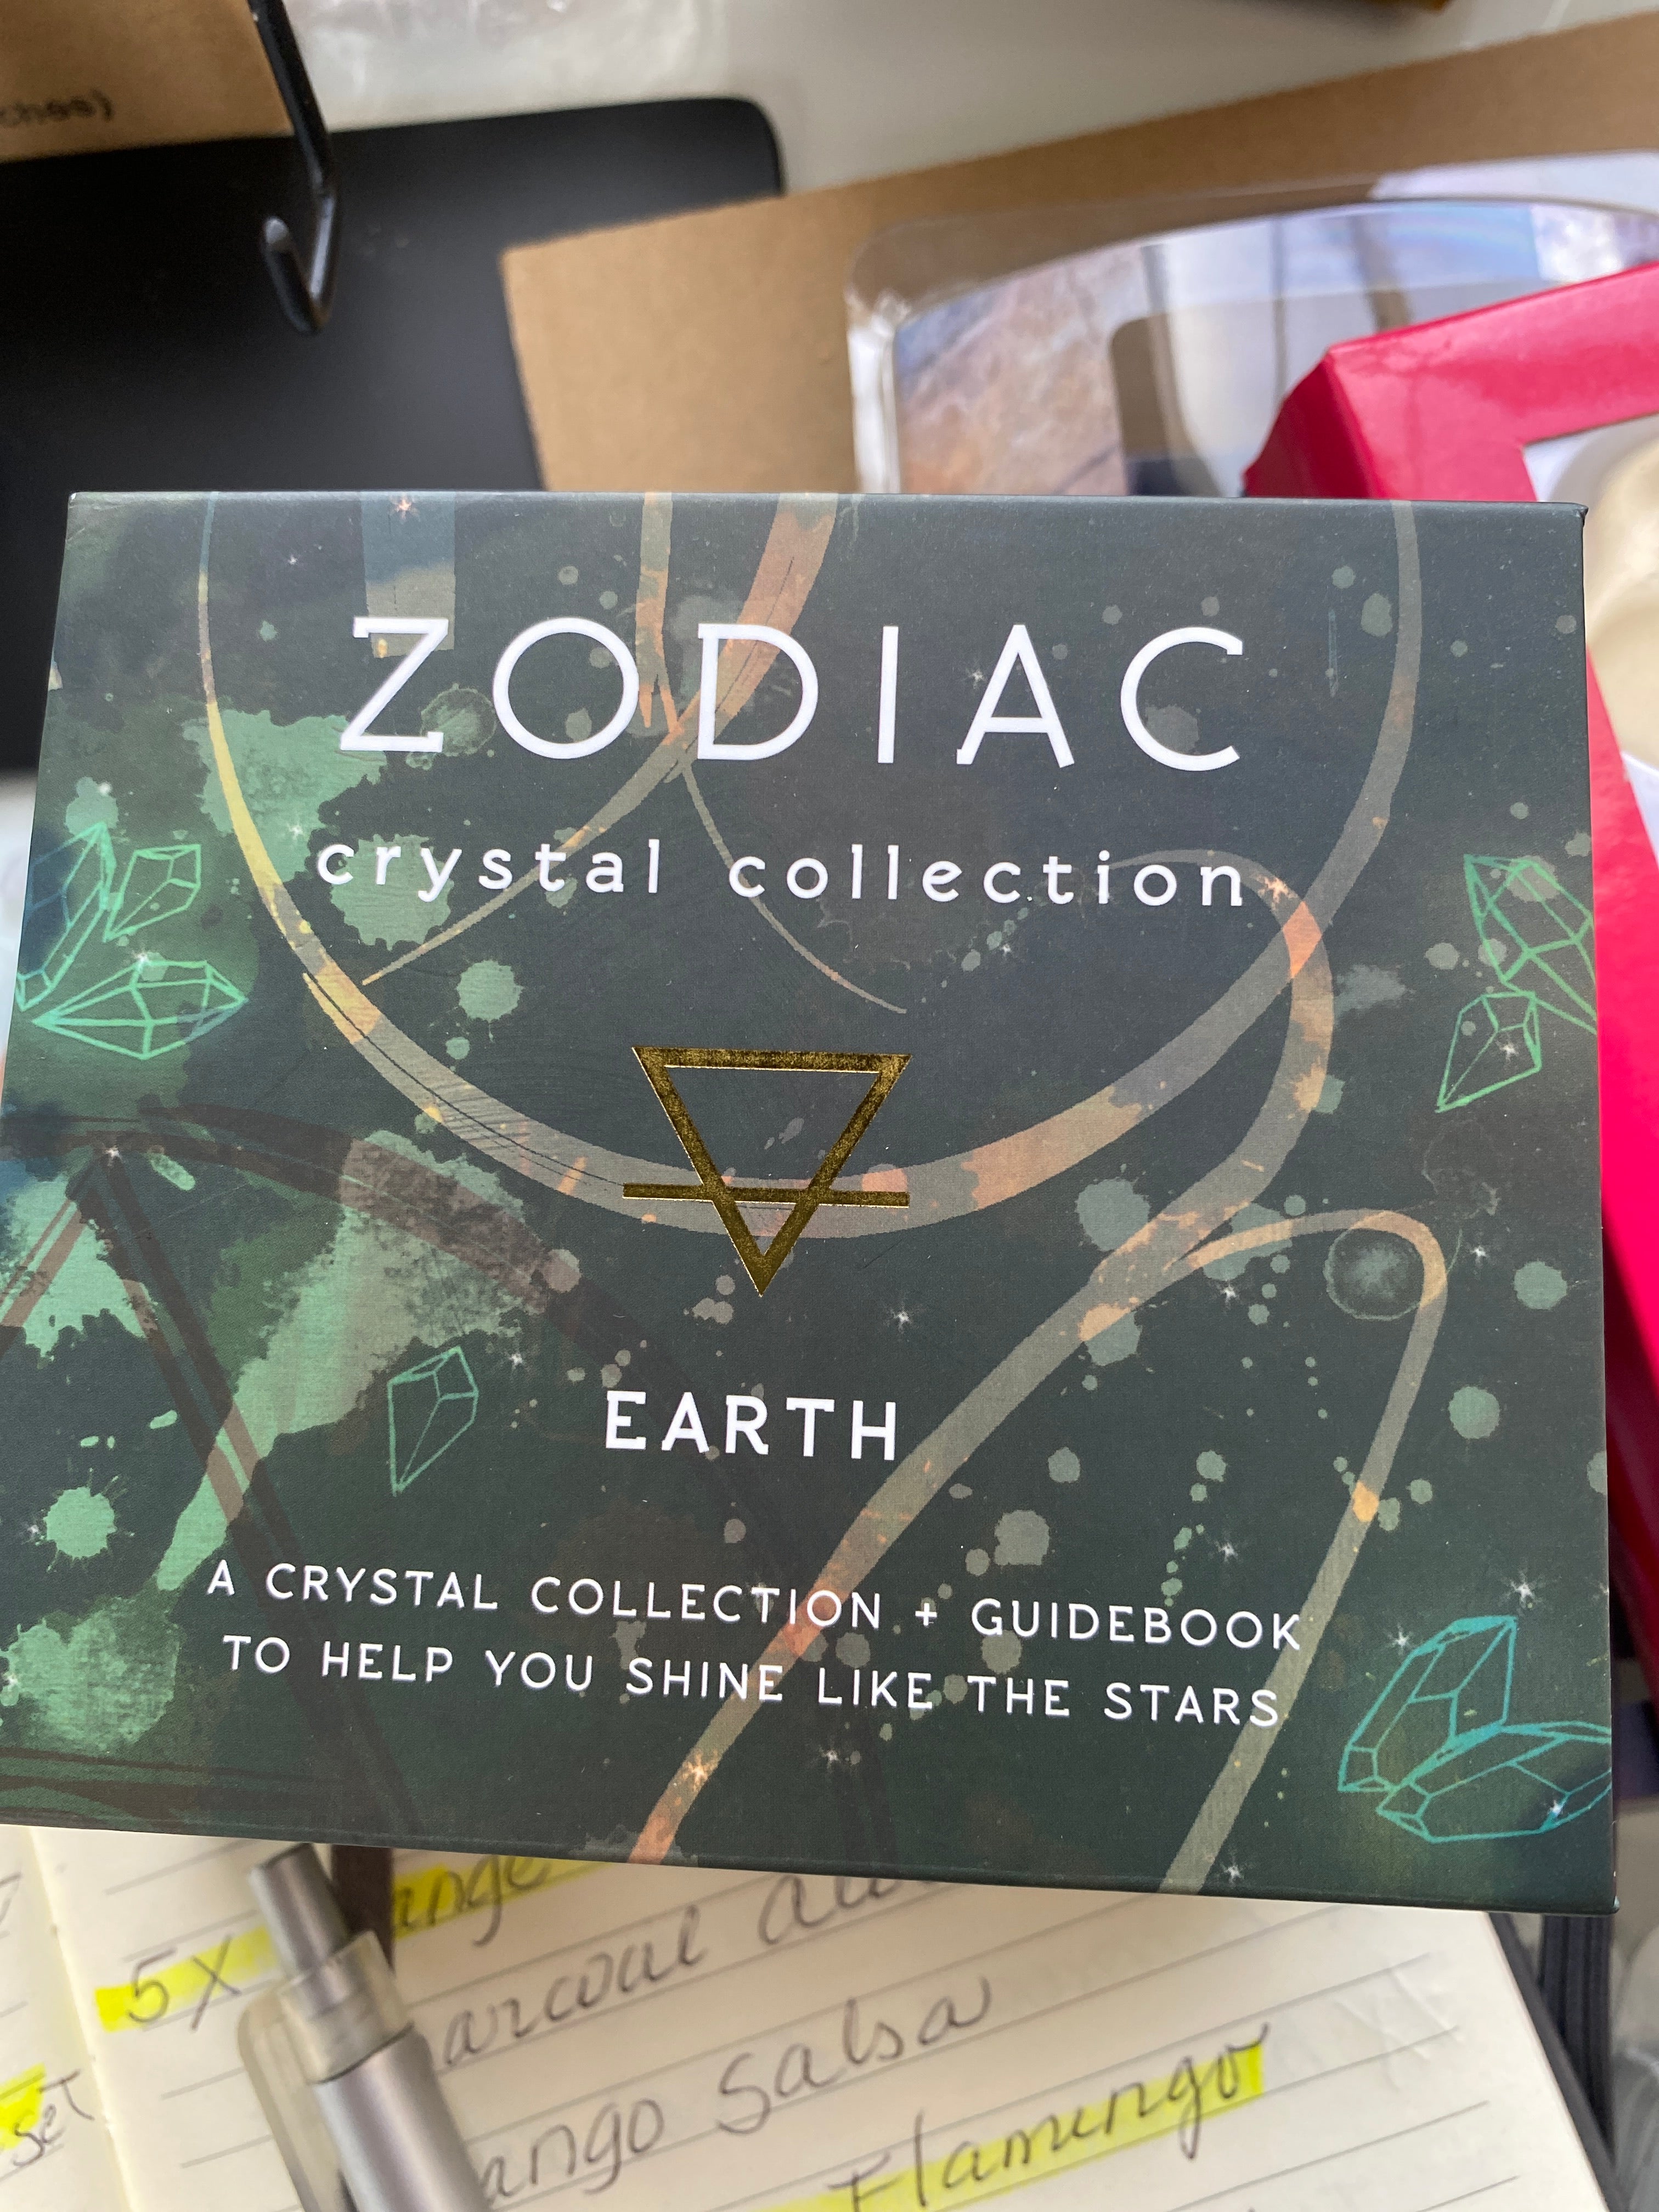 Zodiac crystal collection Earth